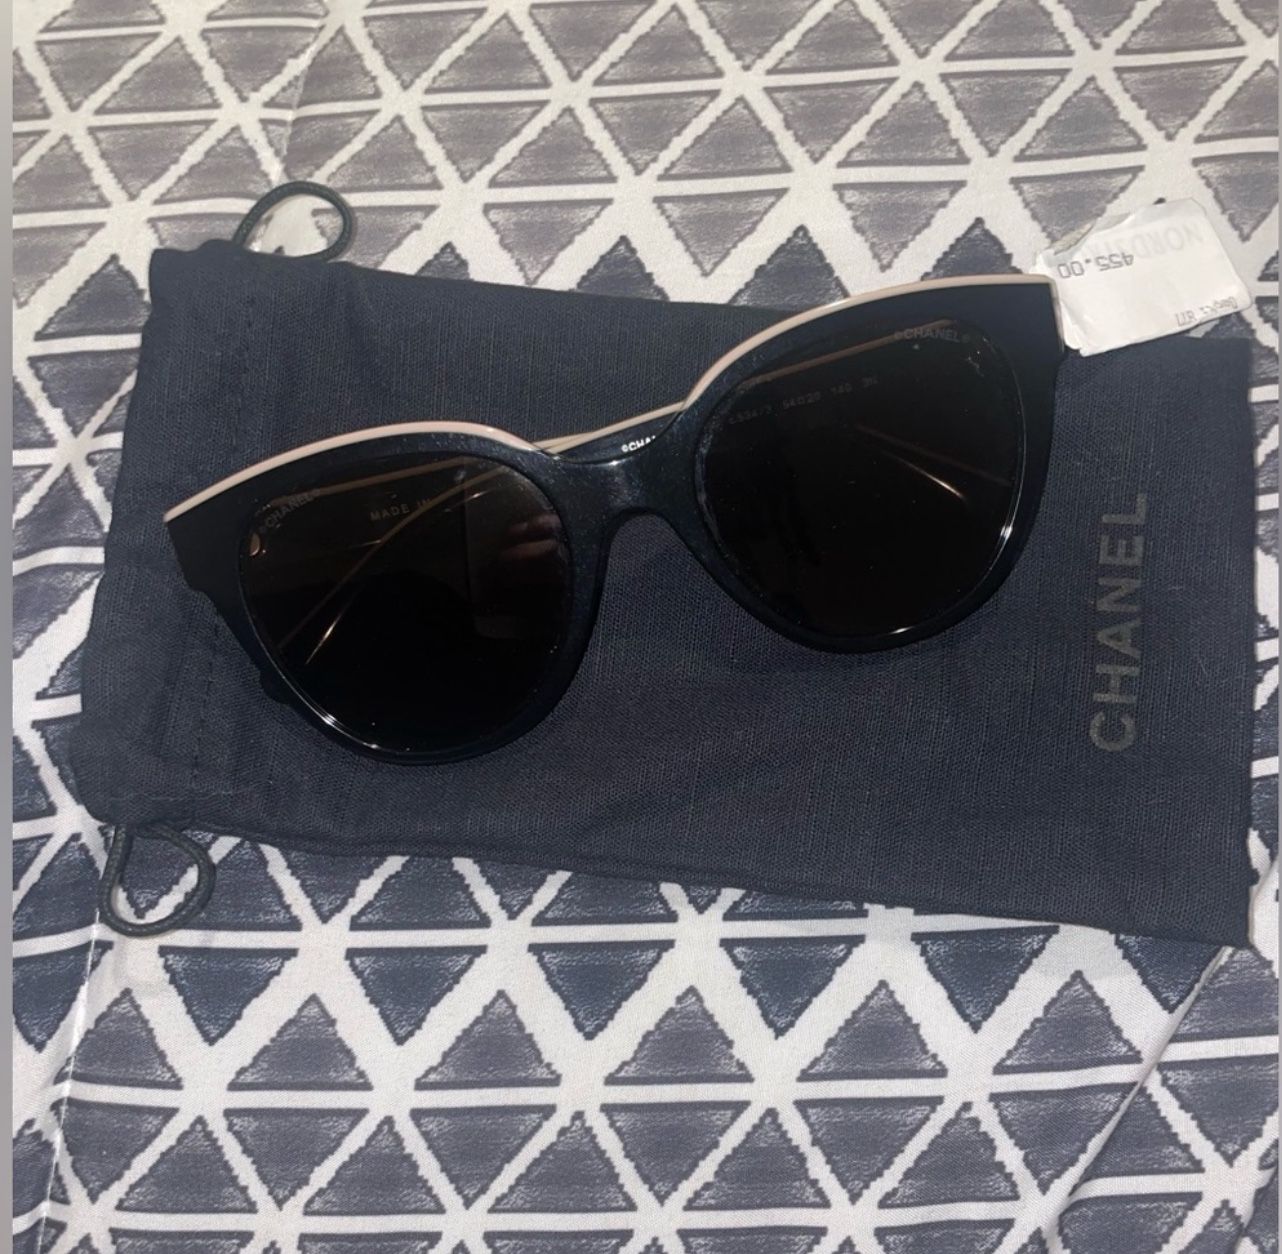 Chanel butterfly sunglasses